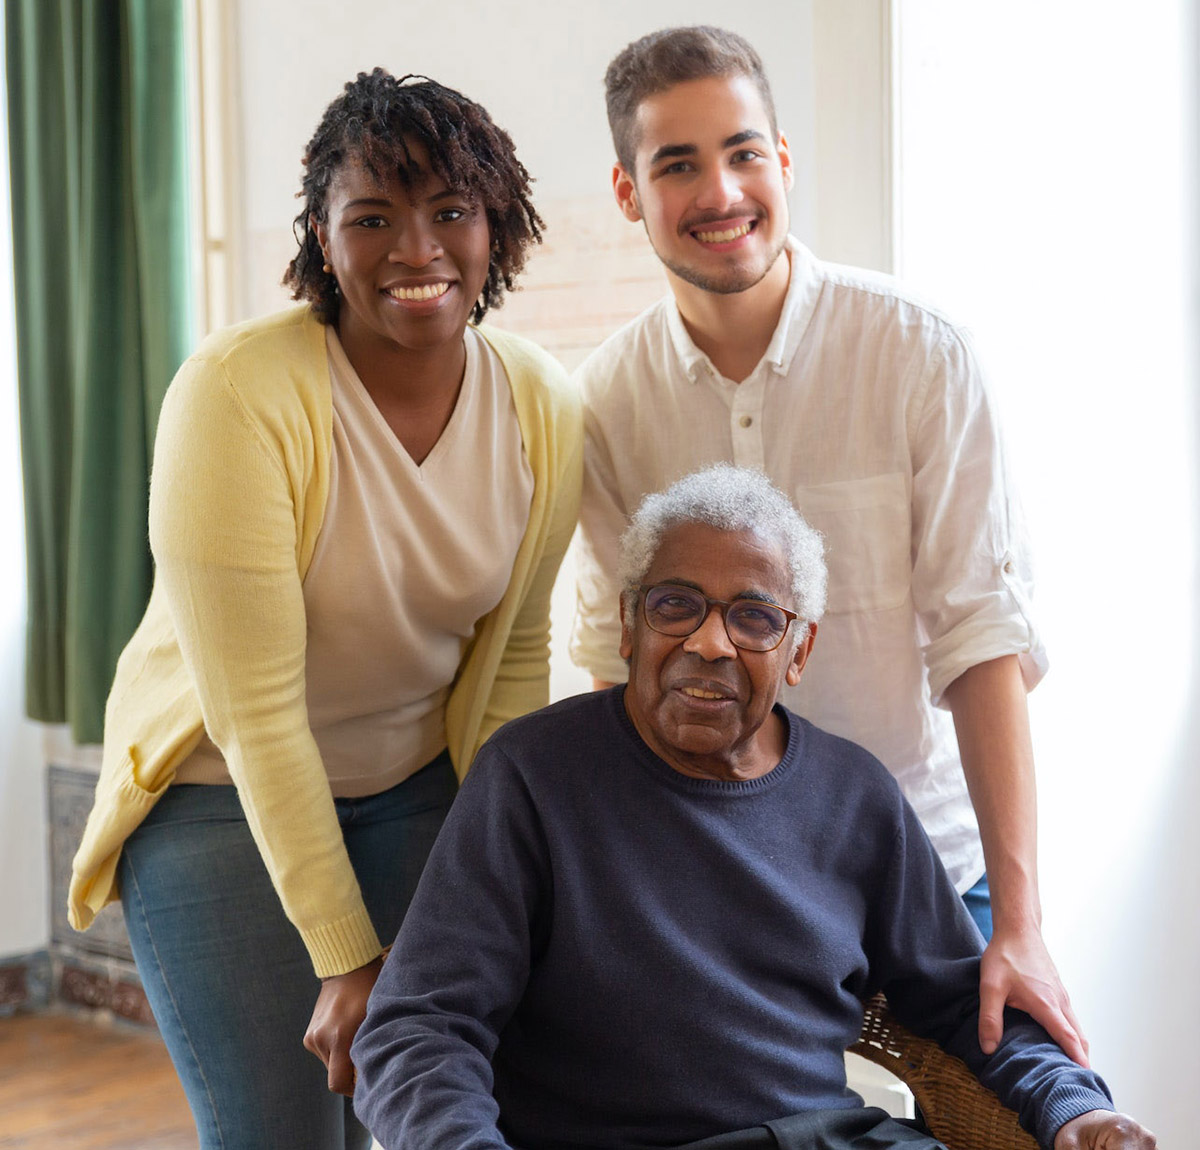 Photo of an older man sitting in a wheelchair flanked by a younger man and woman. All are smiling and happy.